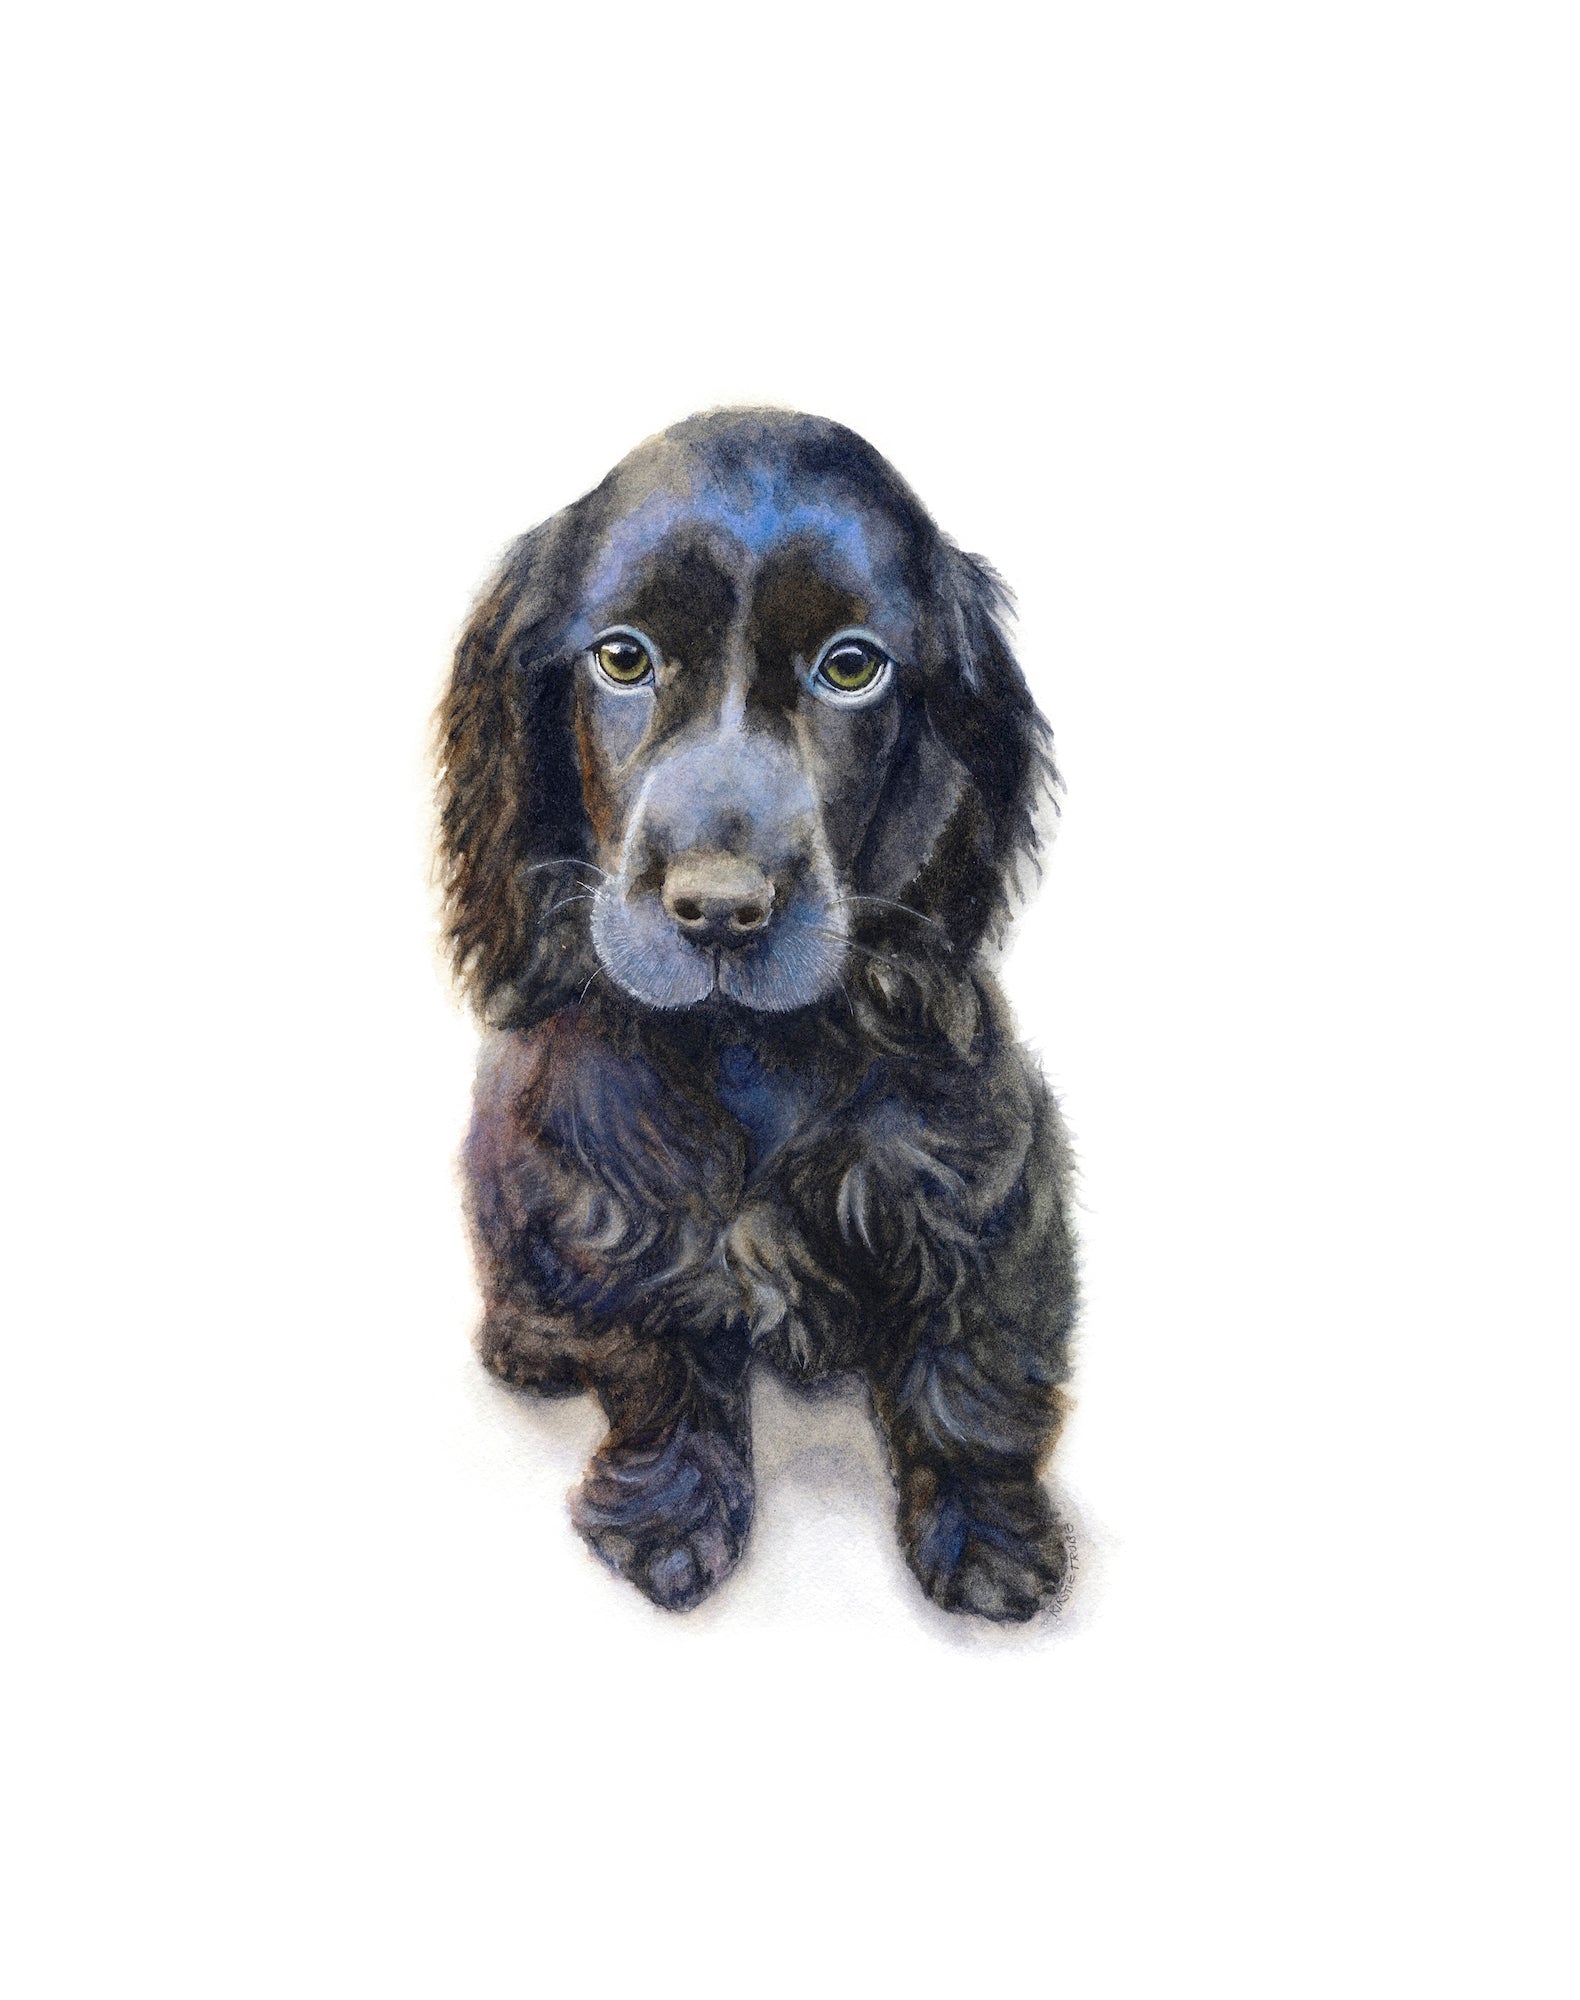 A black Cocker Spaniel puppy sits staring out at the viewer. Set against a plain white background the ruffles of fur and blue sheen of its shiny coat make him irresistible.